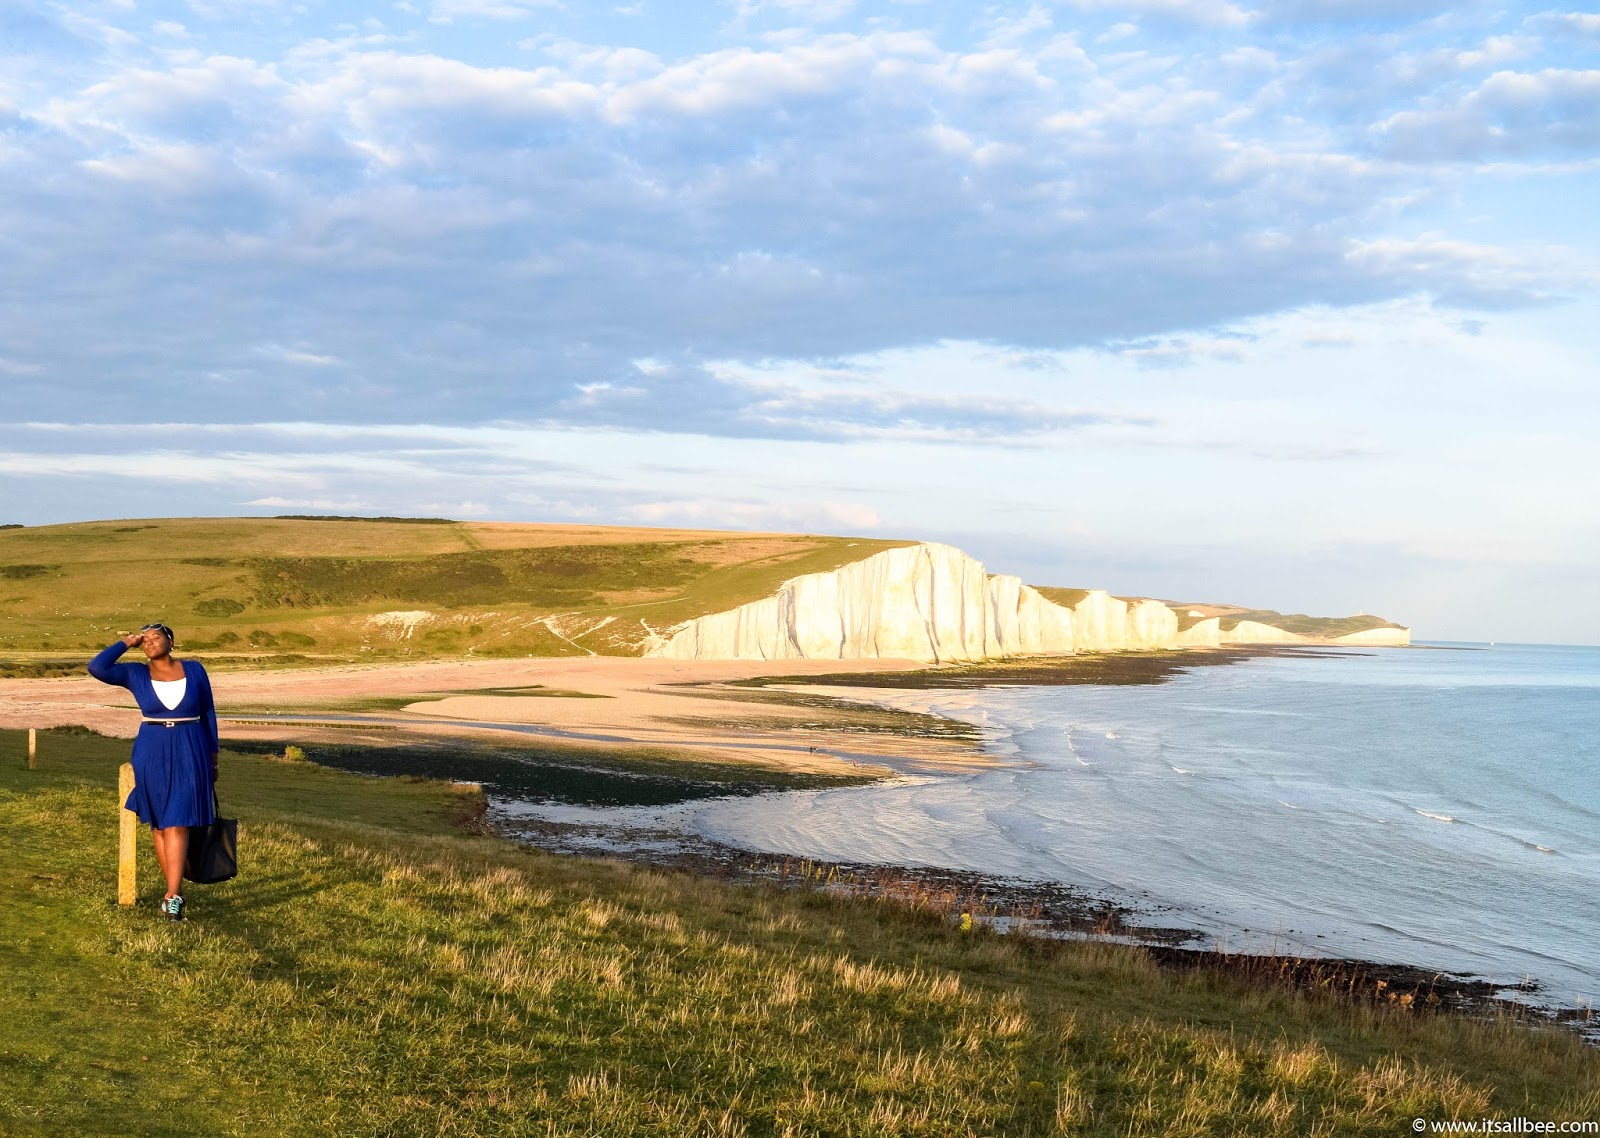 Guide to exploring Seven Sisters In East Sussex. Hiking in the beautiful white chalk hills of East Sussex. Perfect weekend getaway from London. #Eastbourne #BirlingtonGap #Newhaven #Seaford #traveltip #beaches #britain #LondonGetaways #daytrip